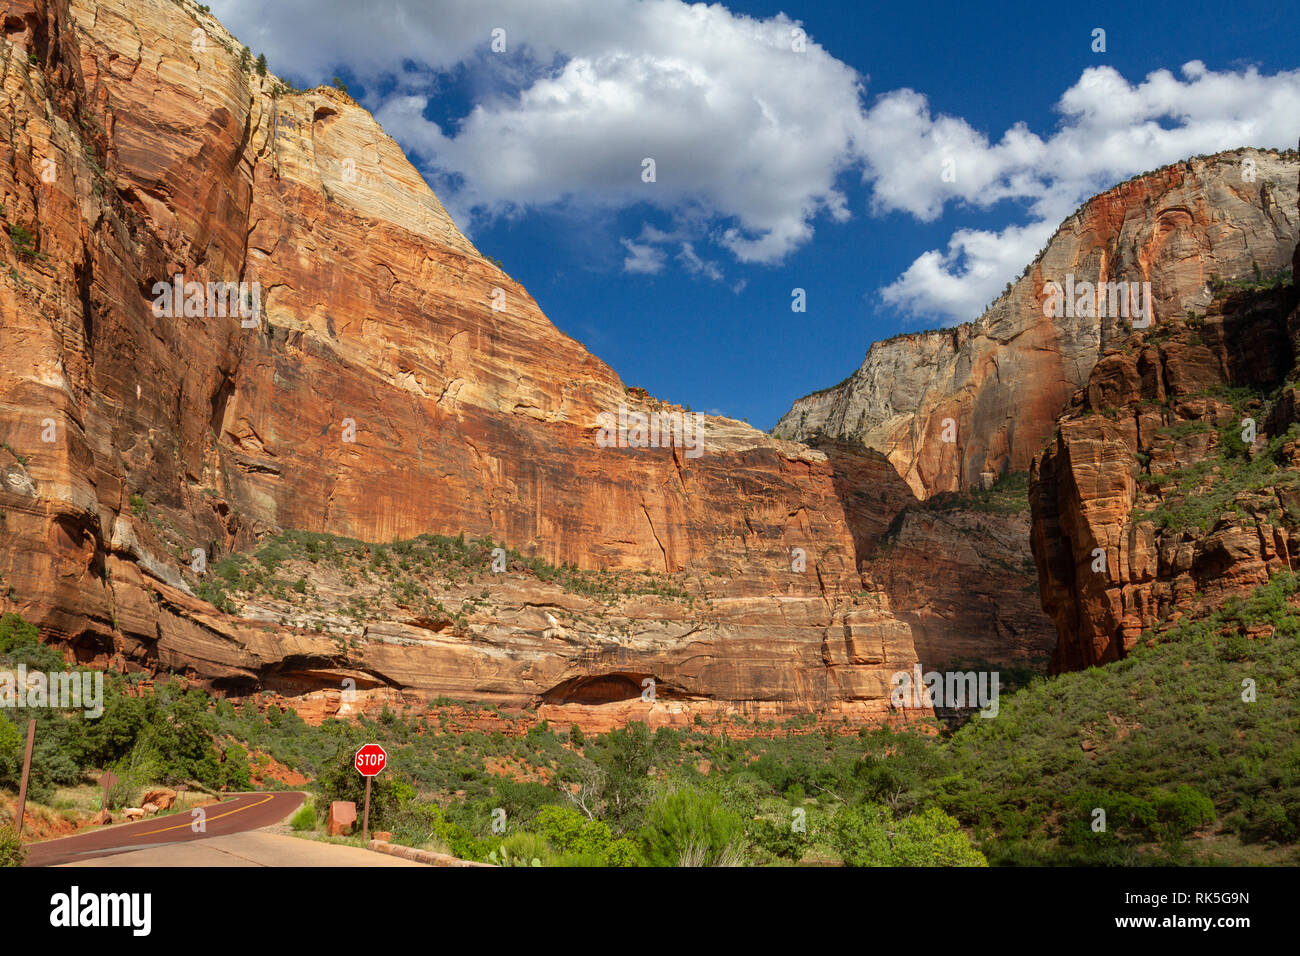 The Big Bend viewpoint, Zion National Park, Springdale, Utah, United States. Stock Photo